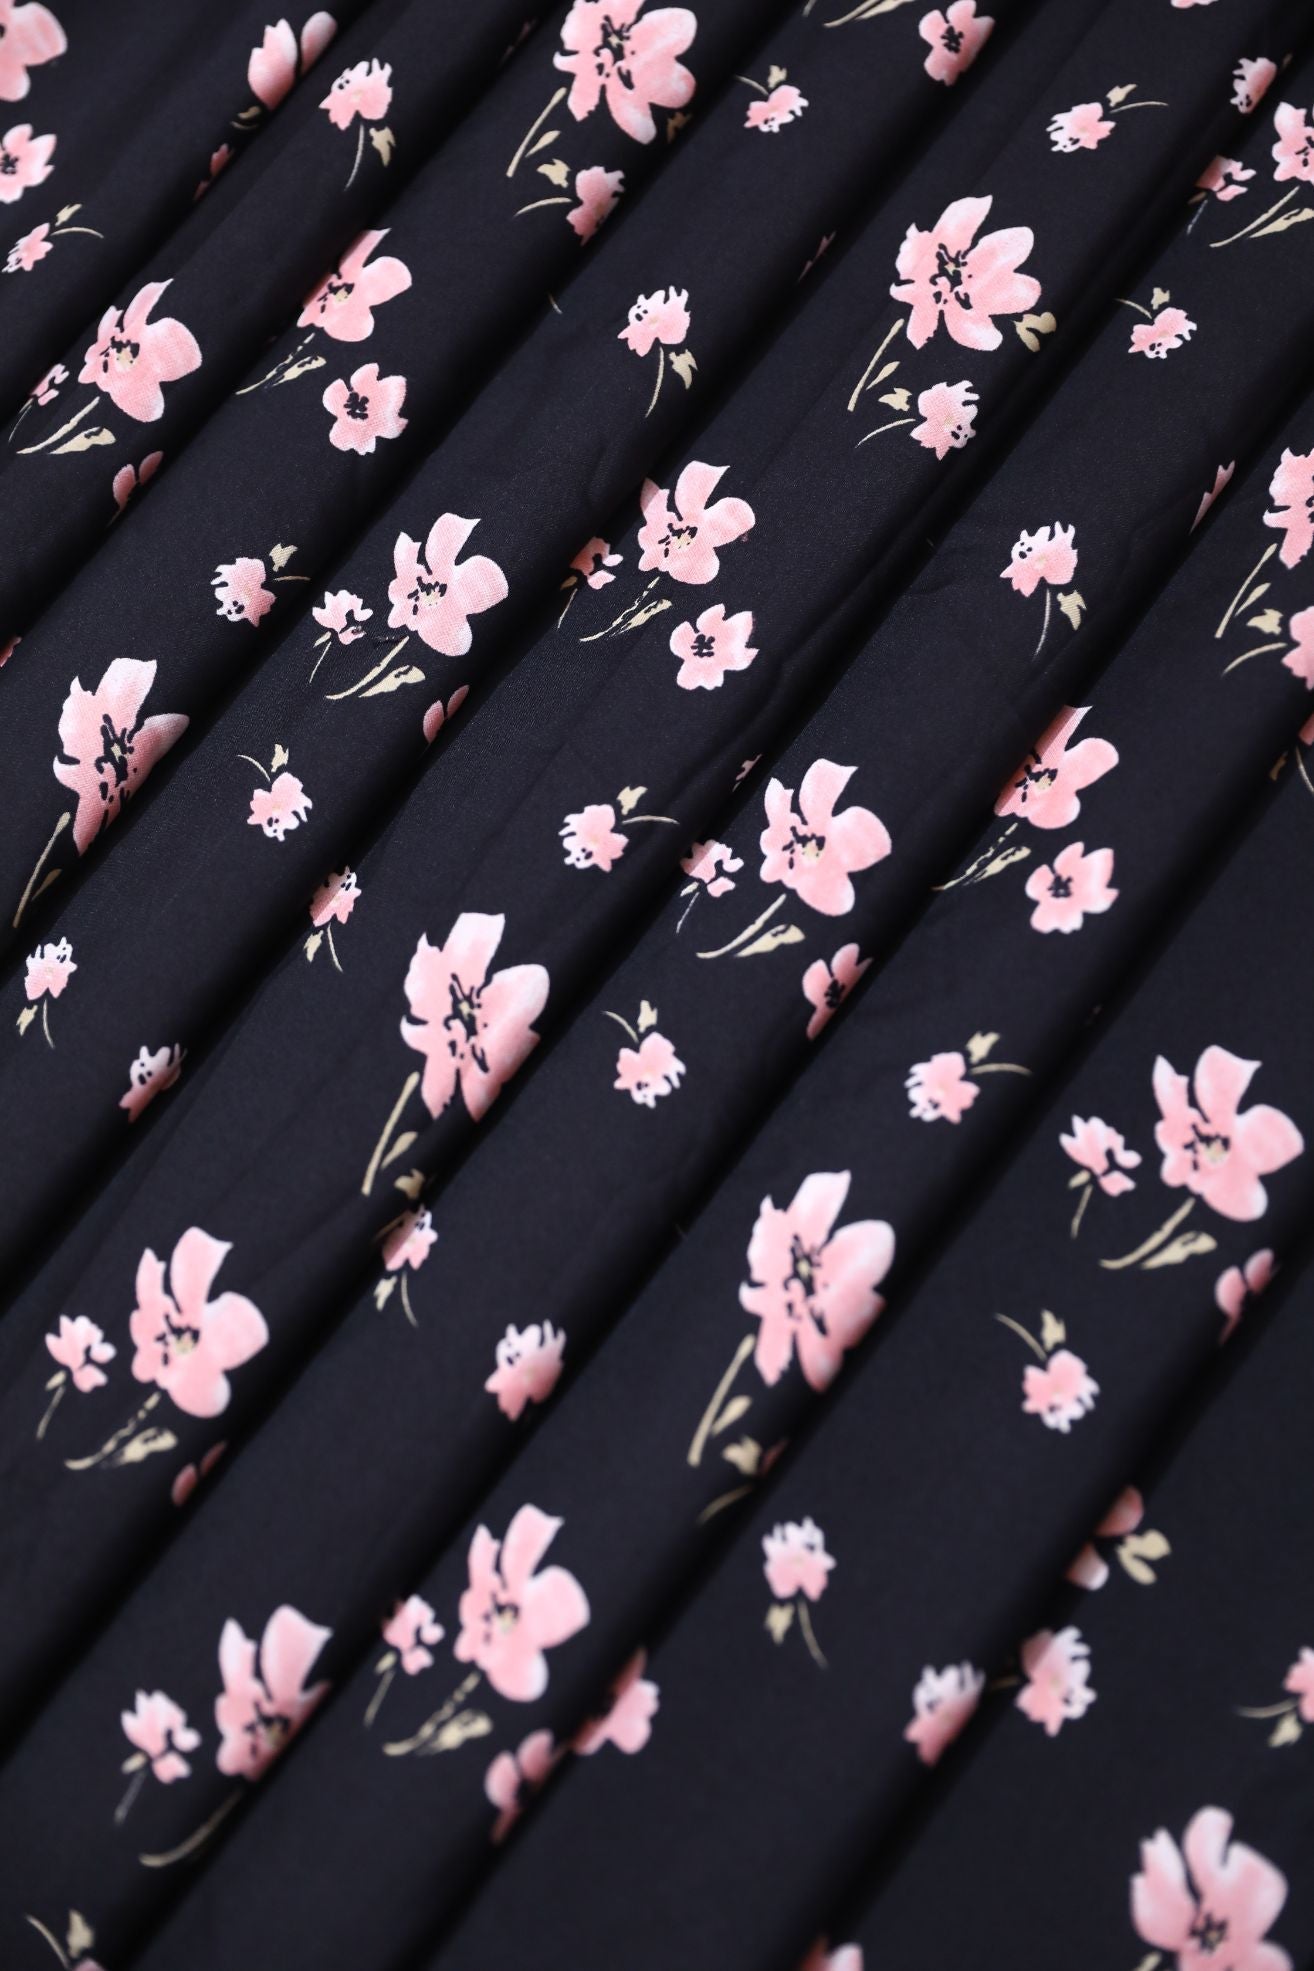 Black and Pink Floral Crepe Fabric